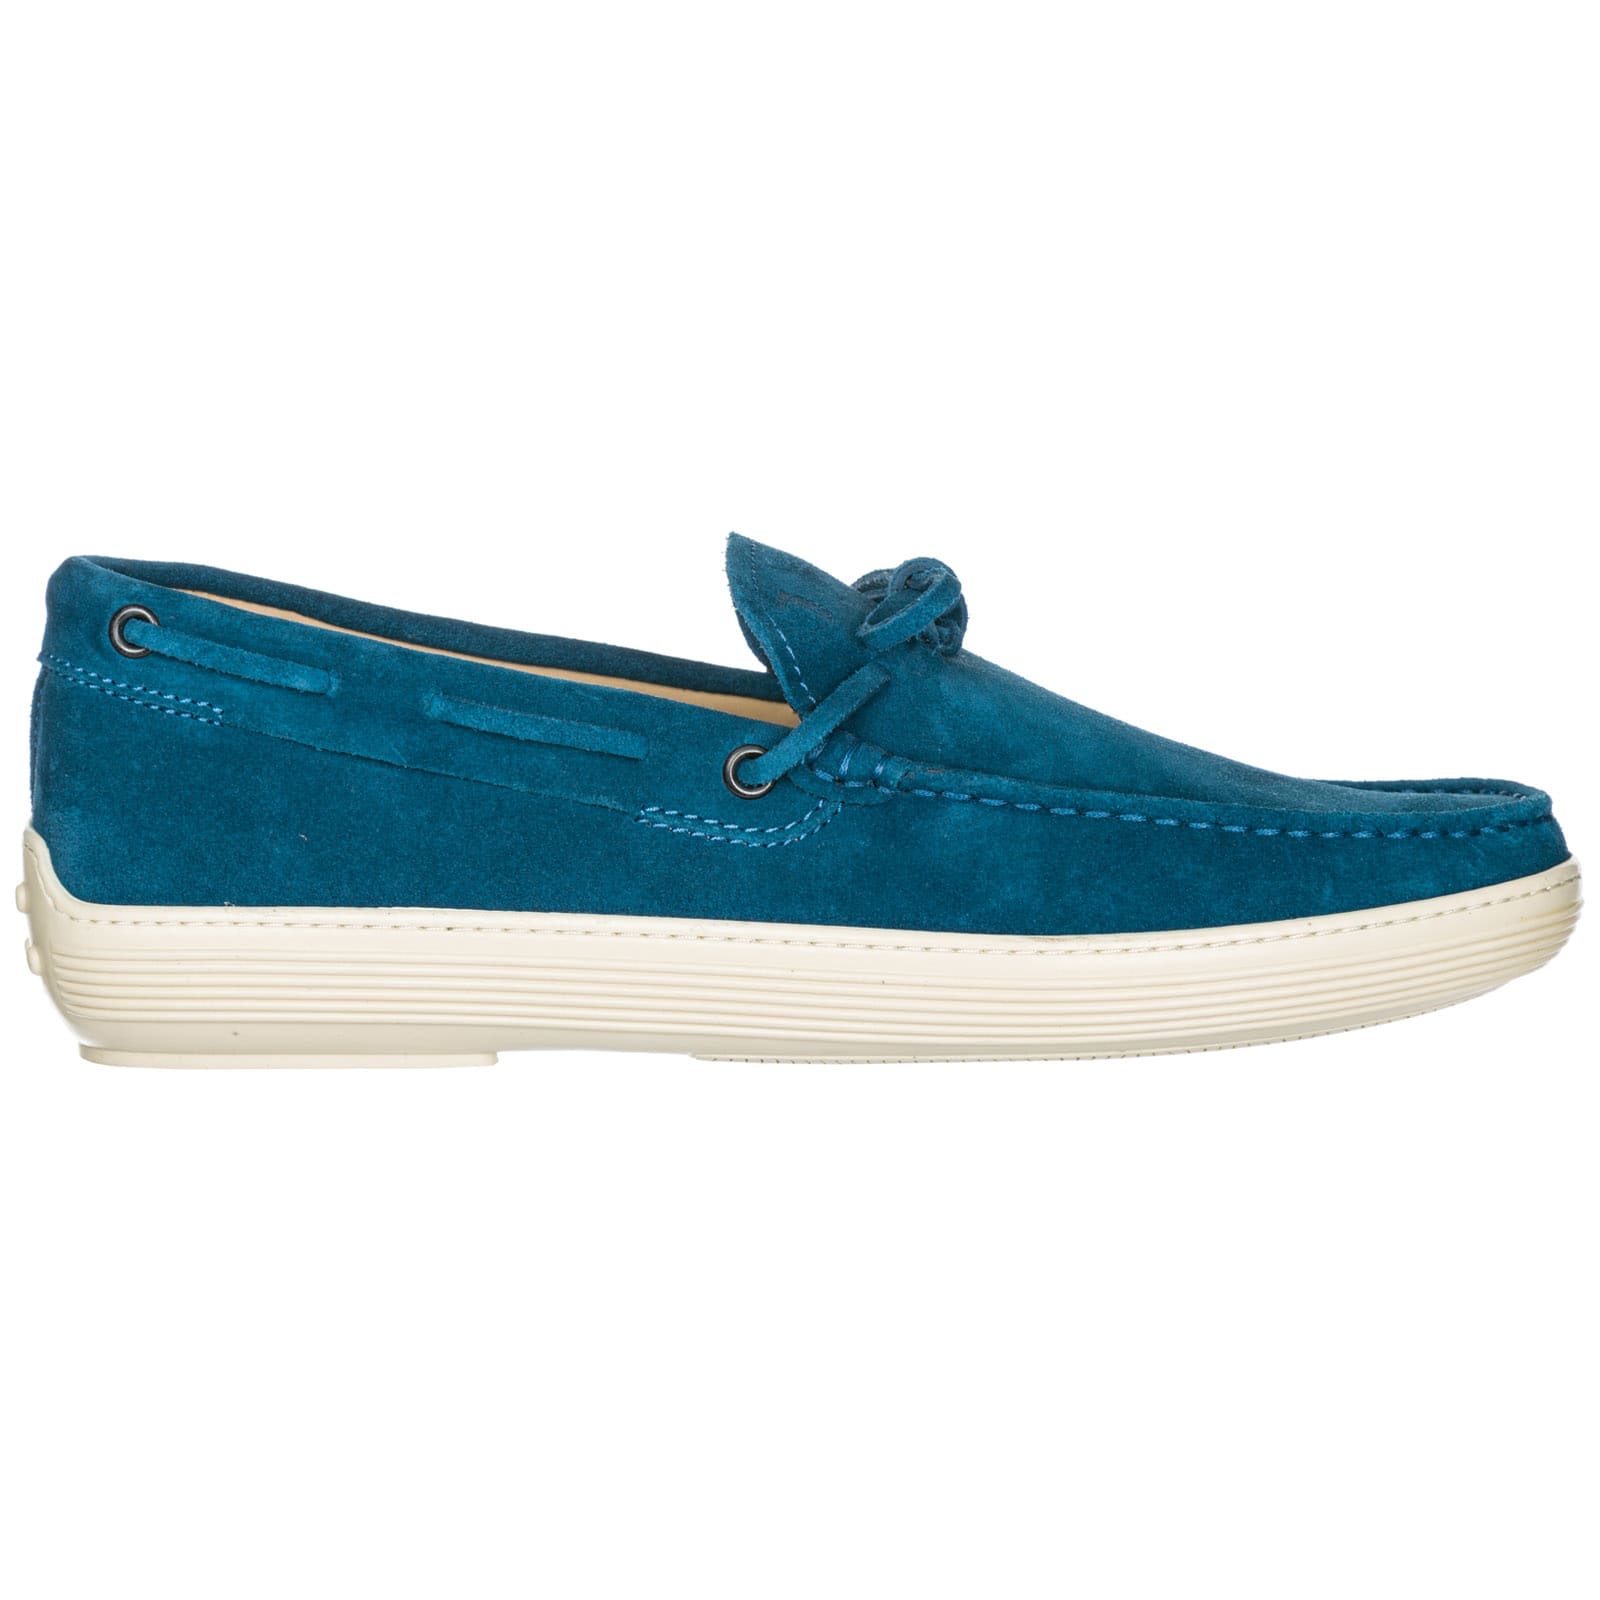 Tods Cluster Moccasins